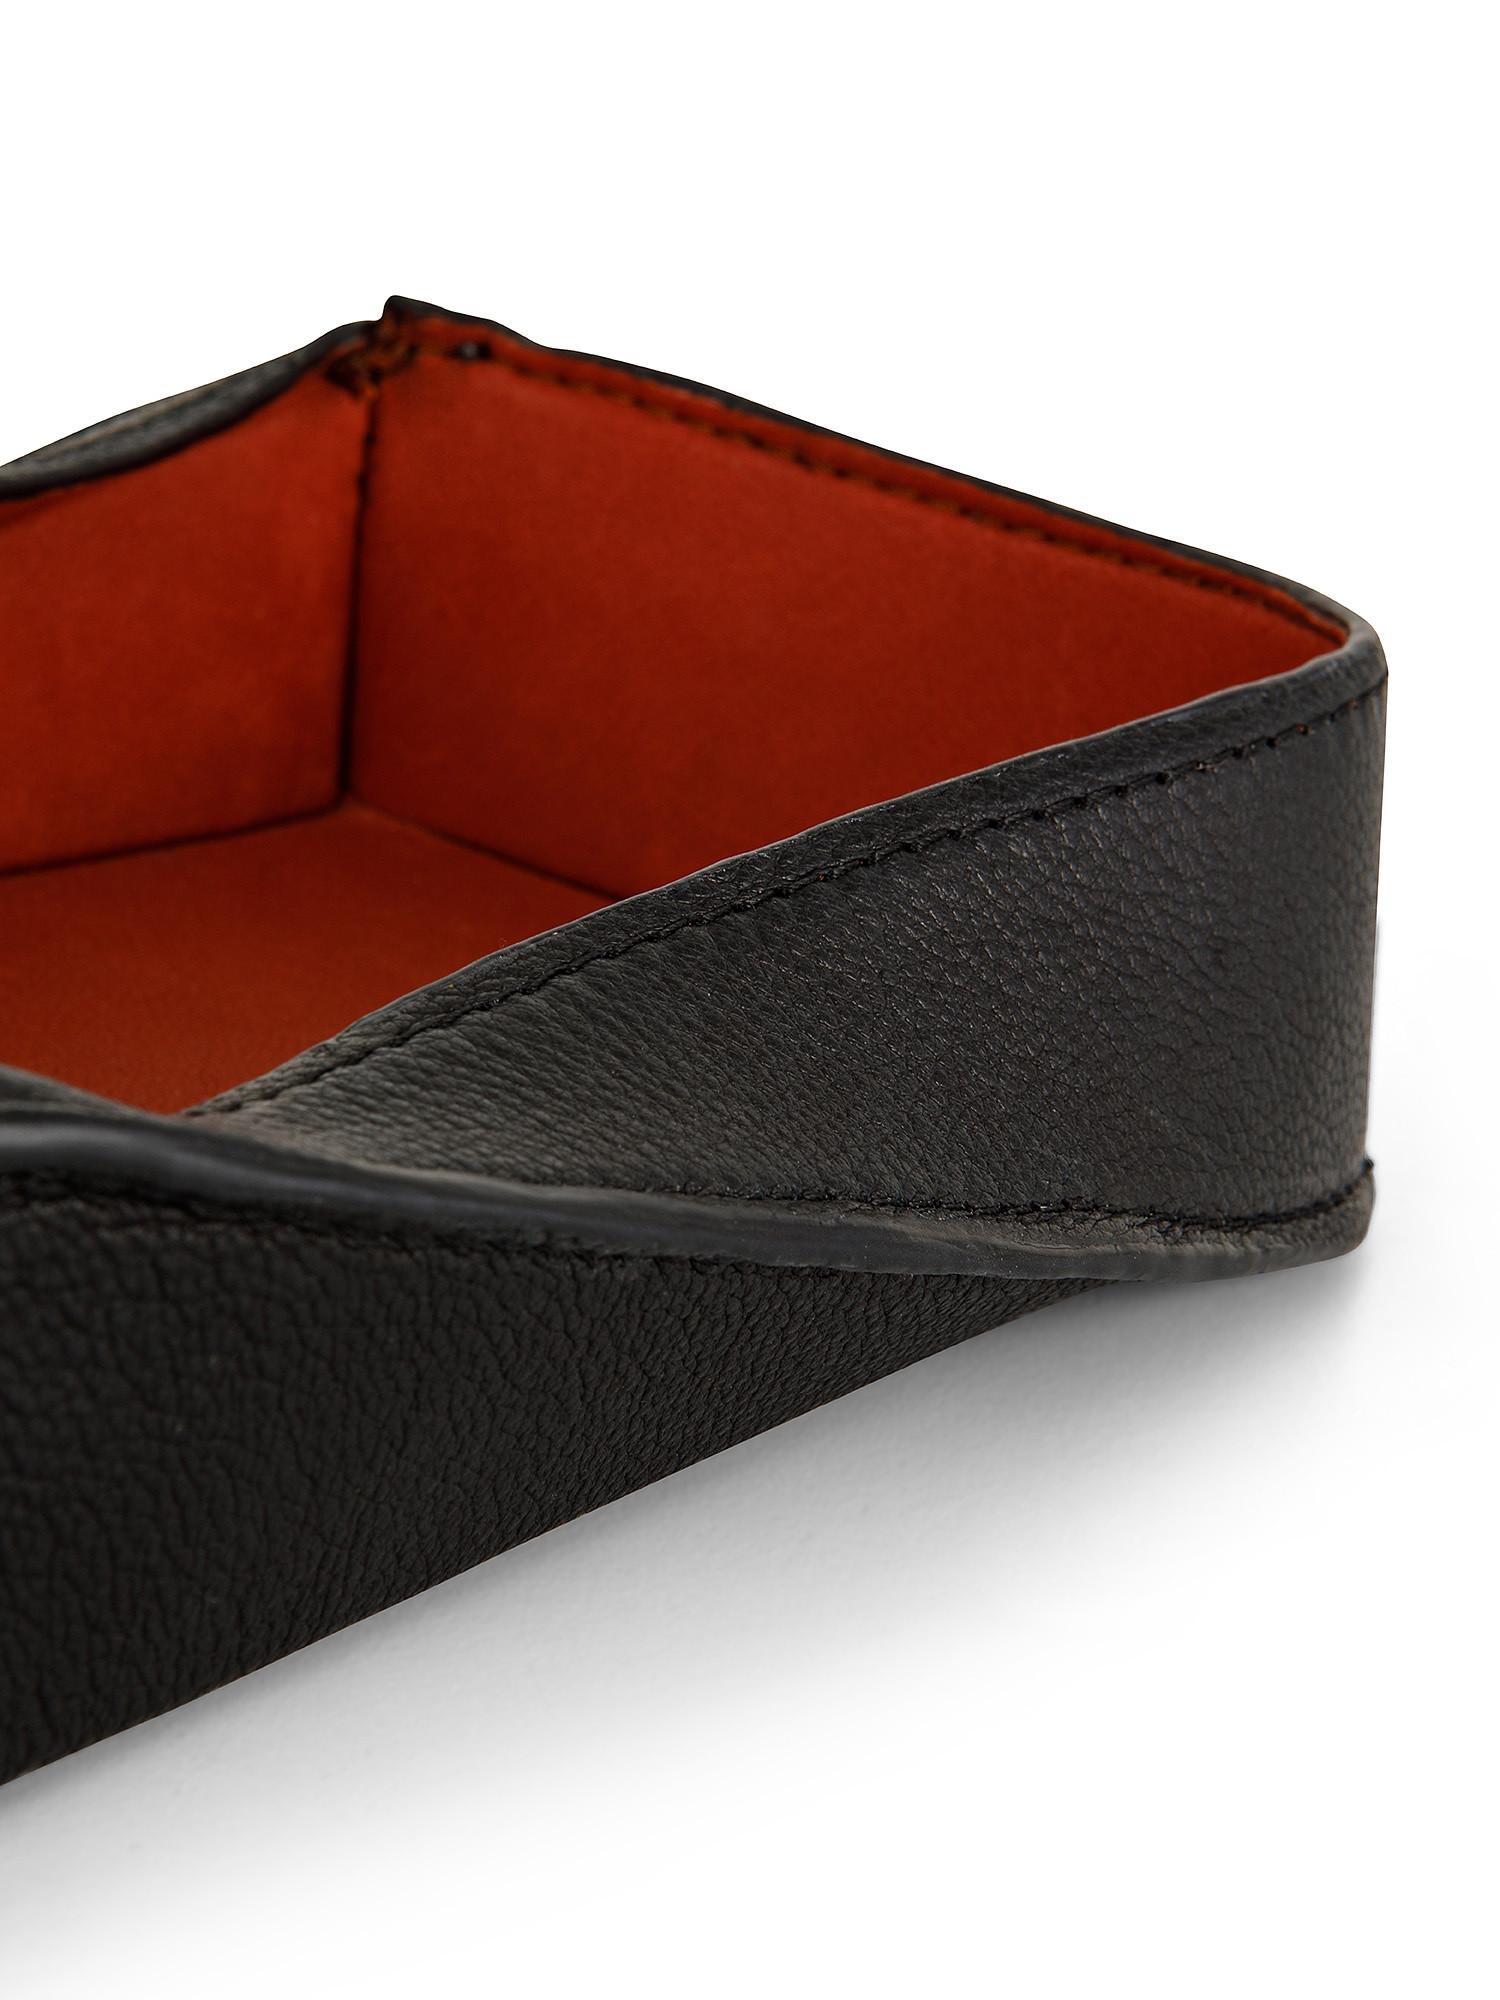 Buffalo leather valet tray by La.b, Multicolor, large image number 1